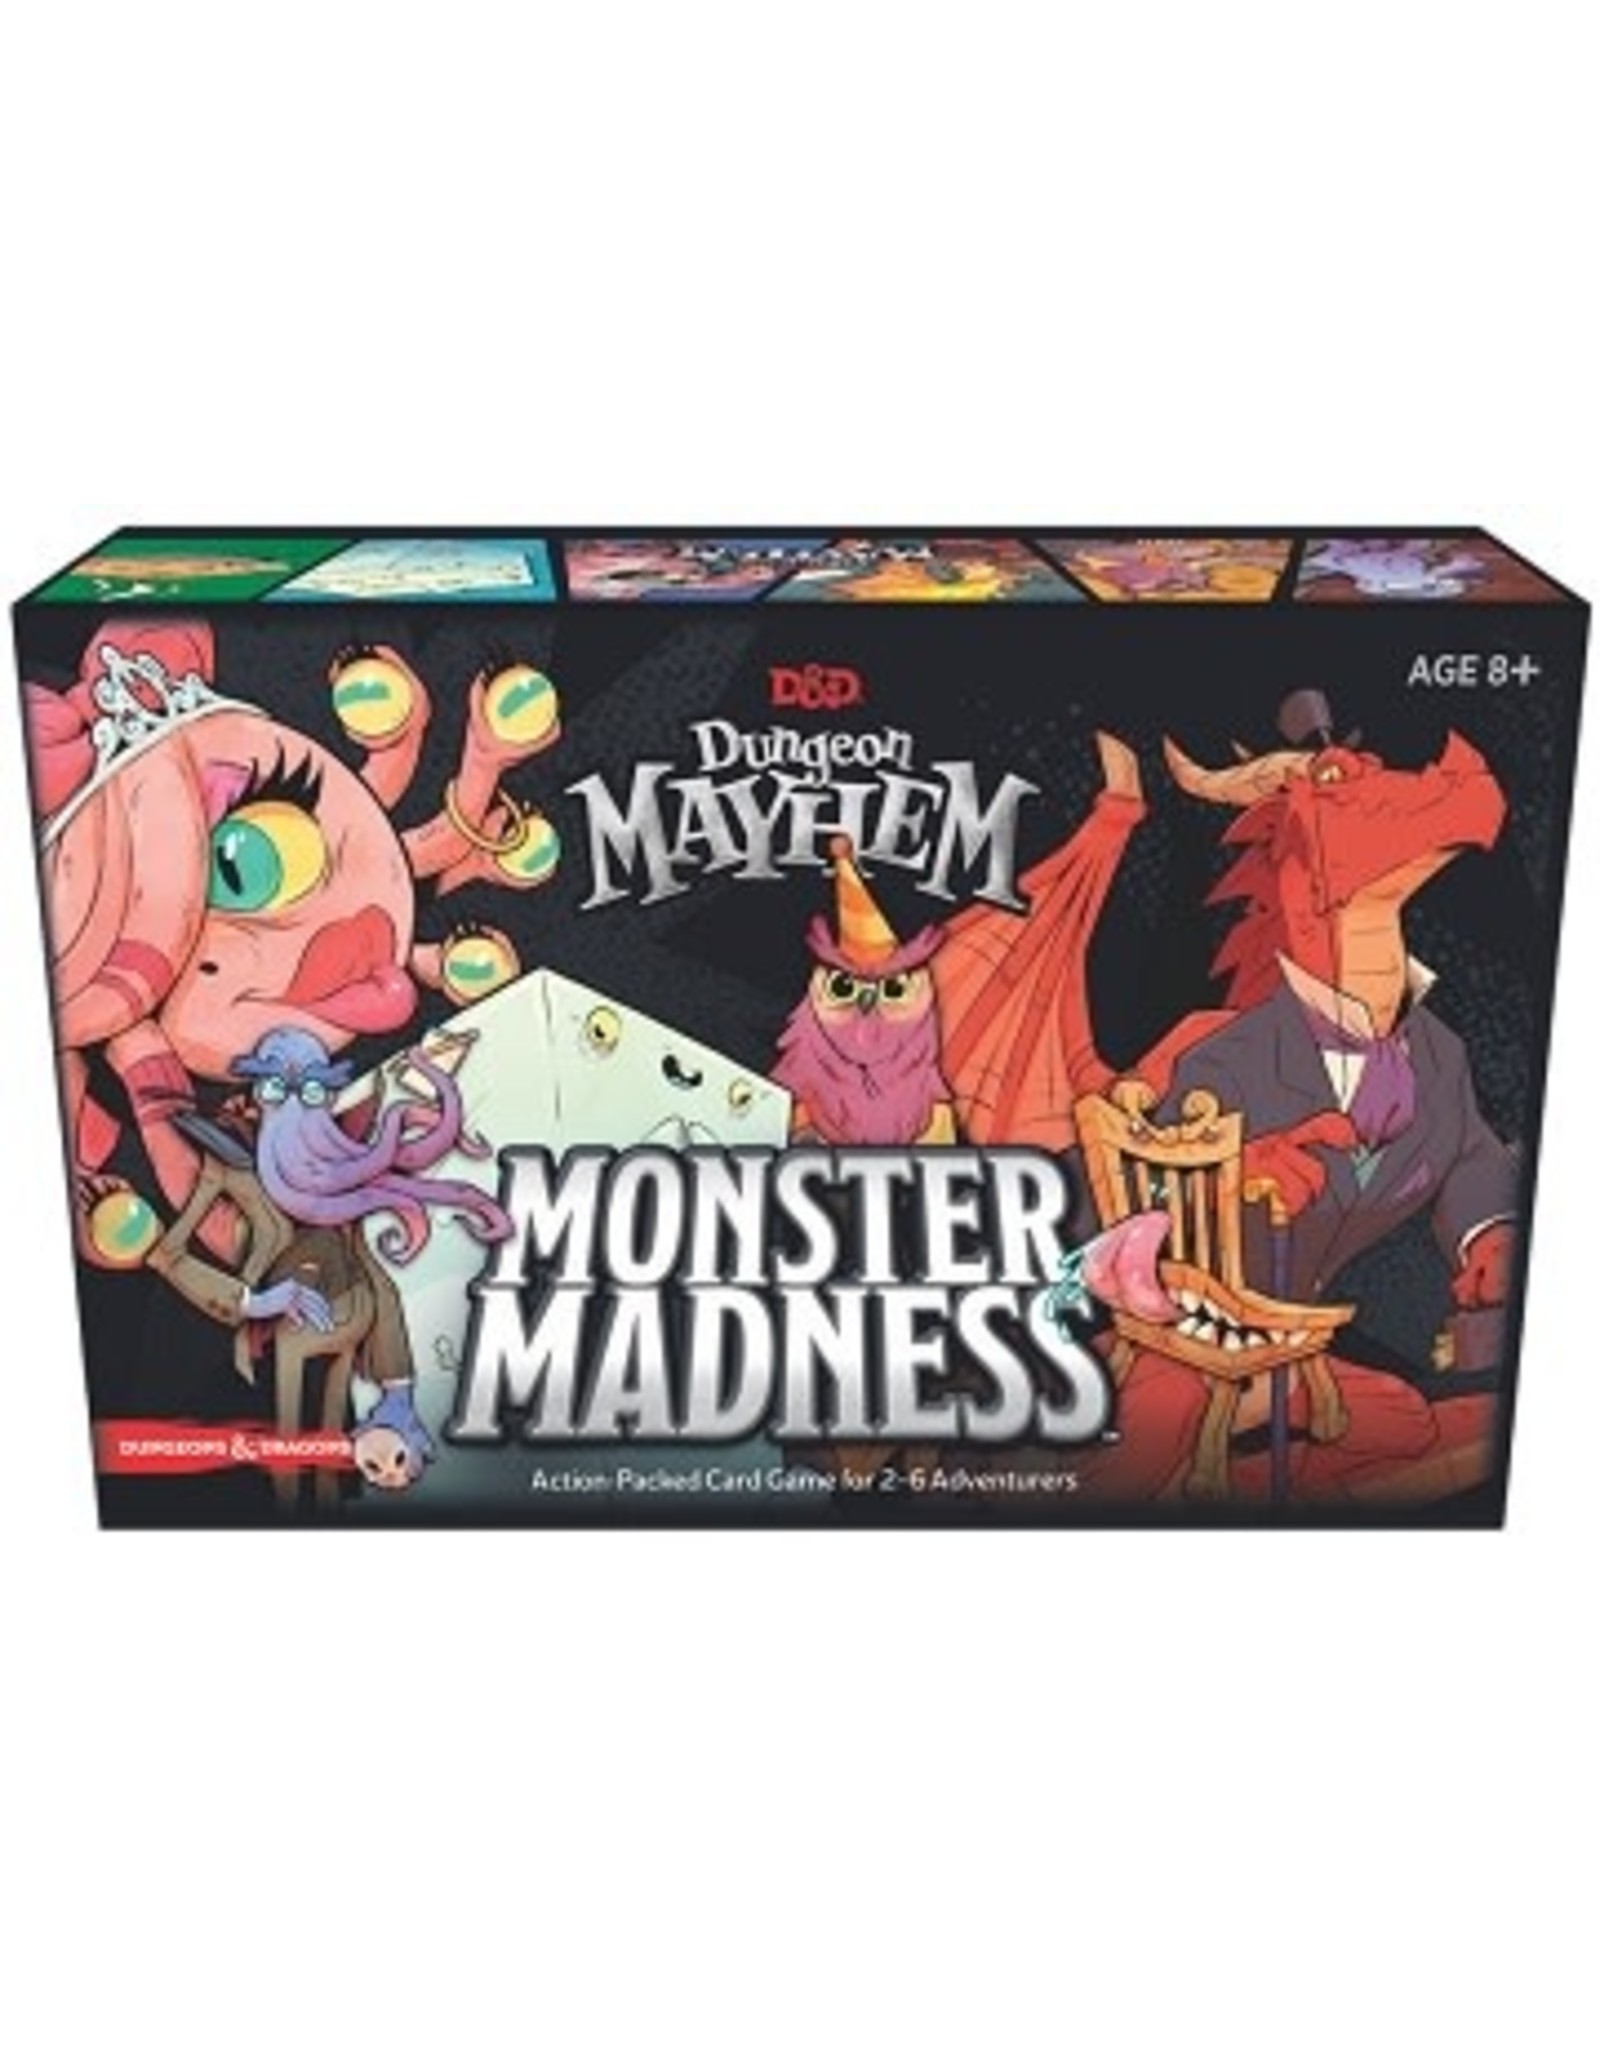 Wizards of the Coast DND Dungeon Mayhem Monster Madness